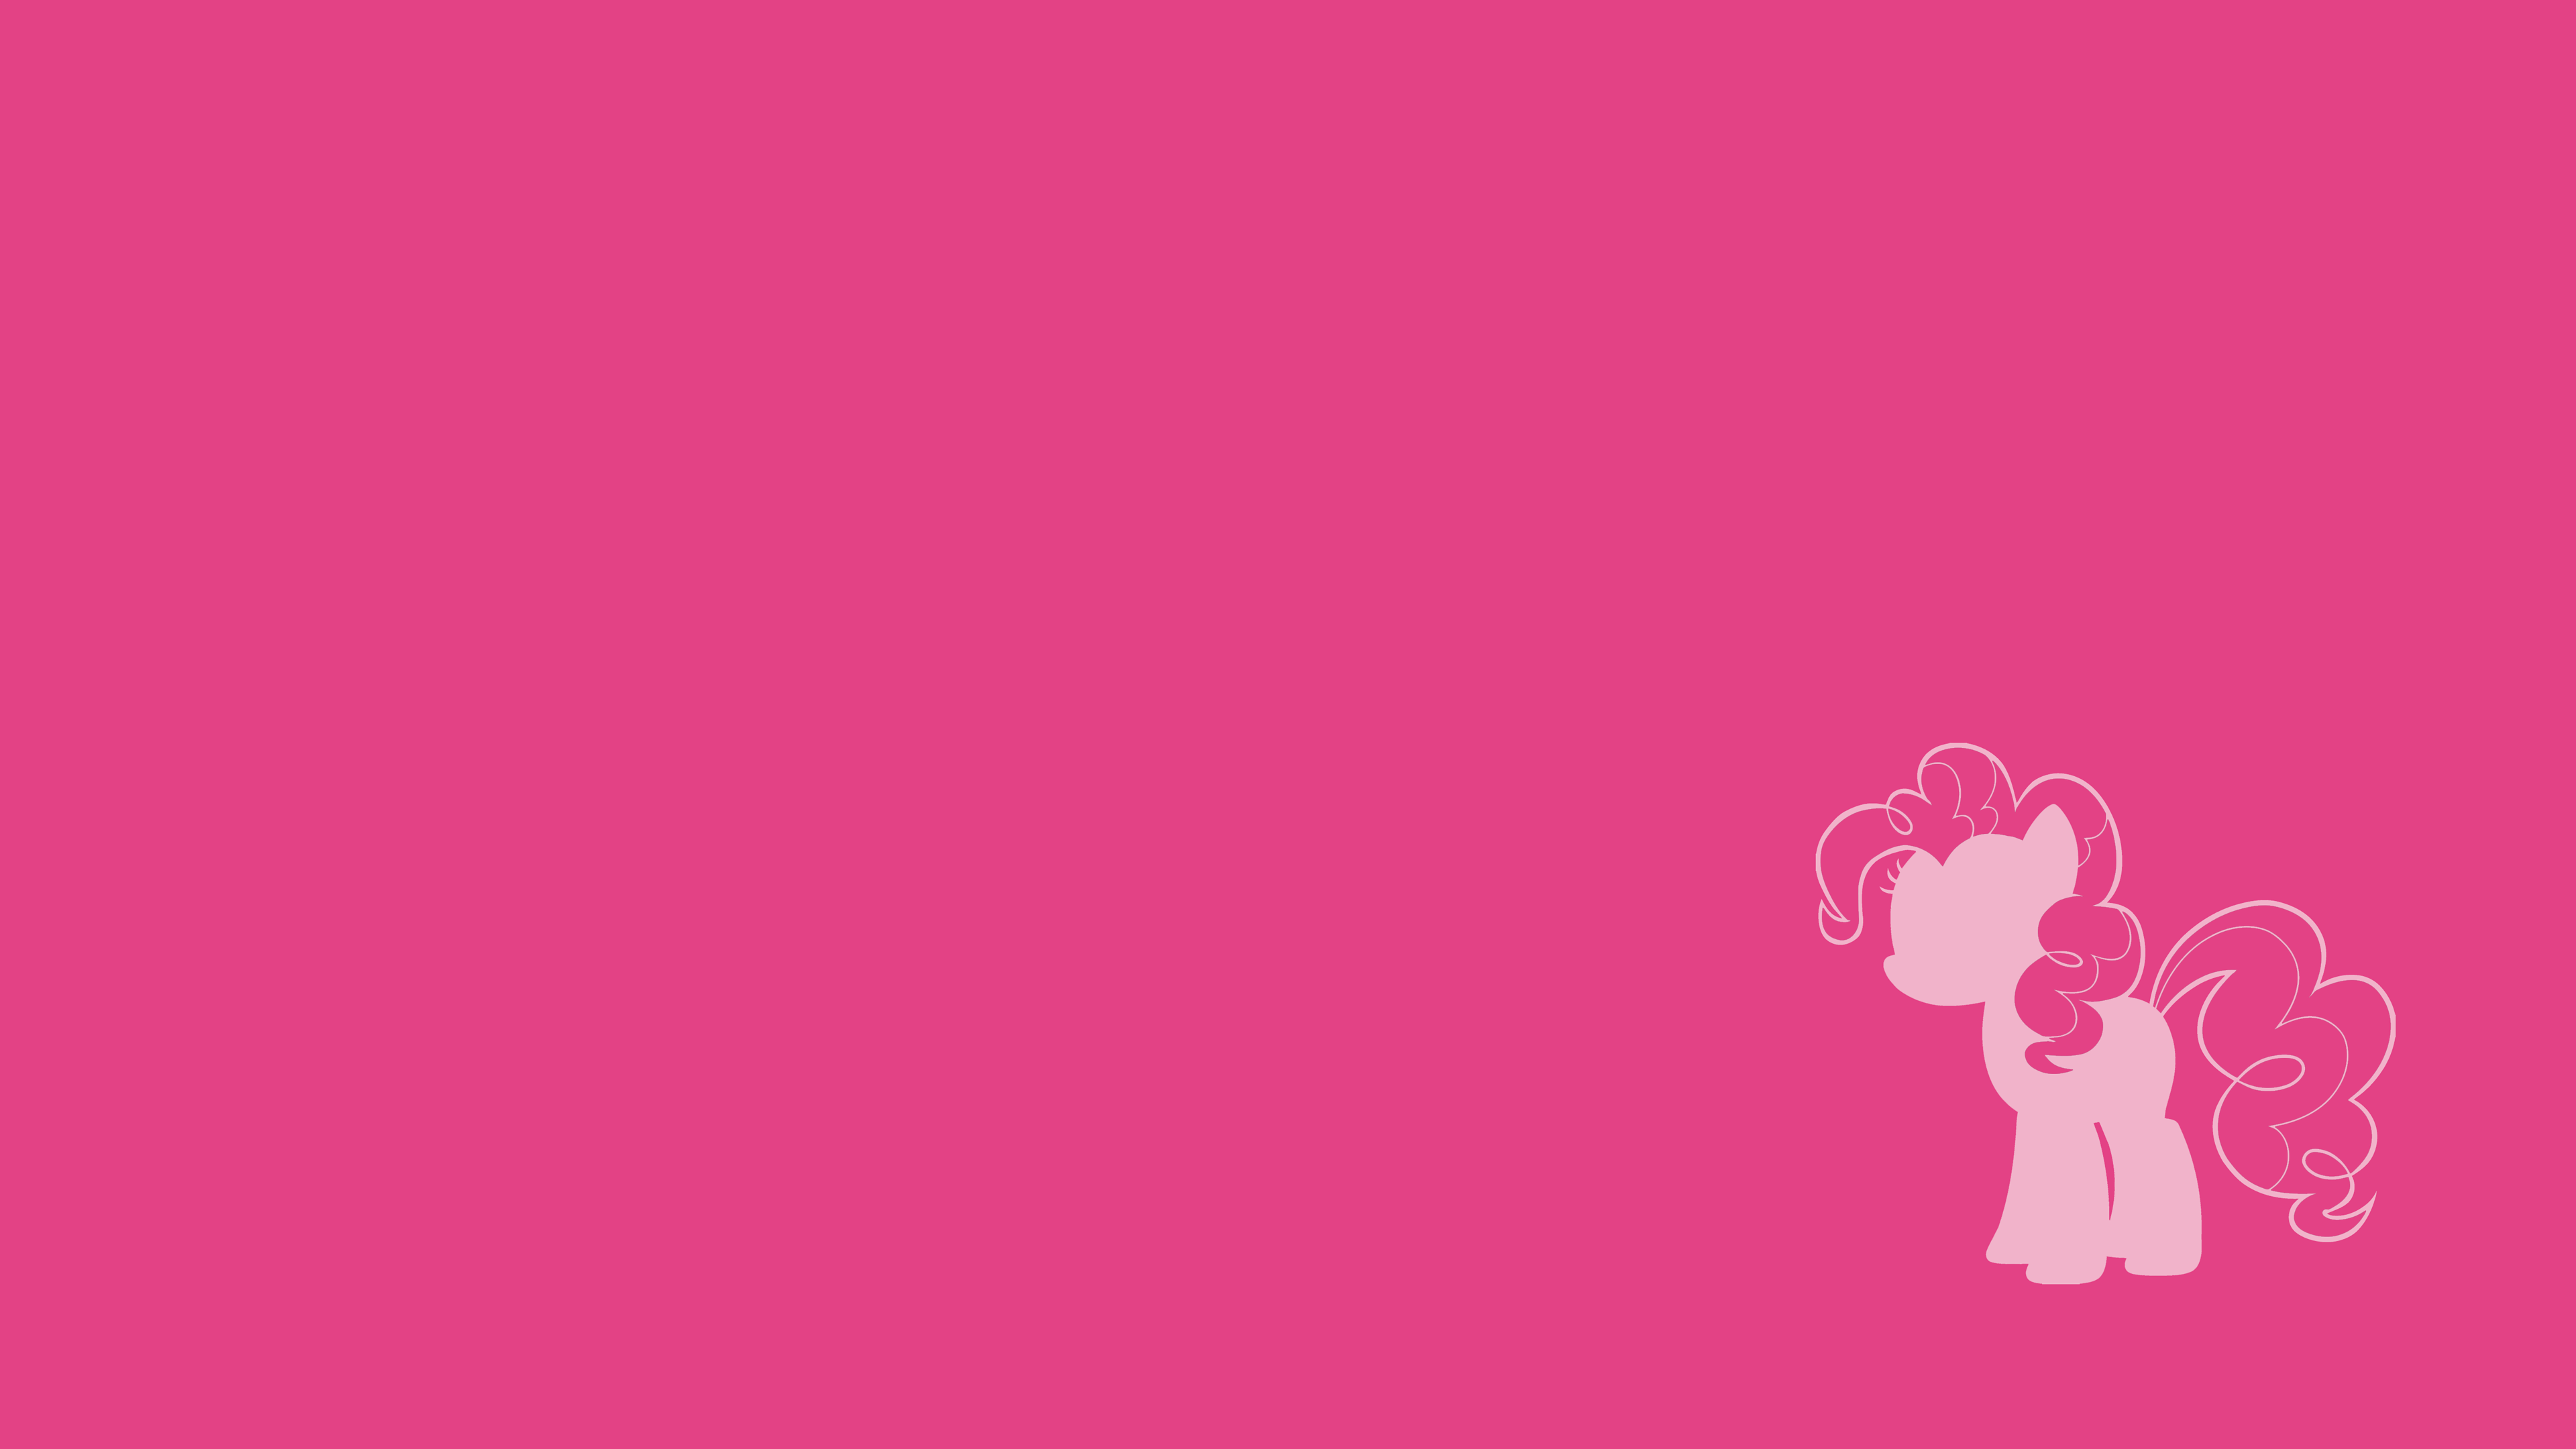 Simple Wallpapers - Pinkie Pie by DaVca